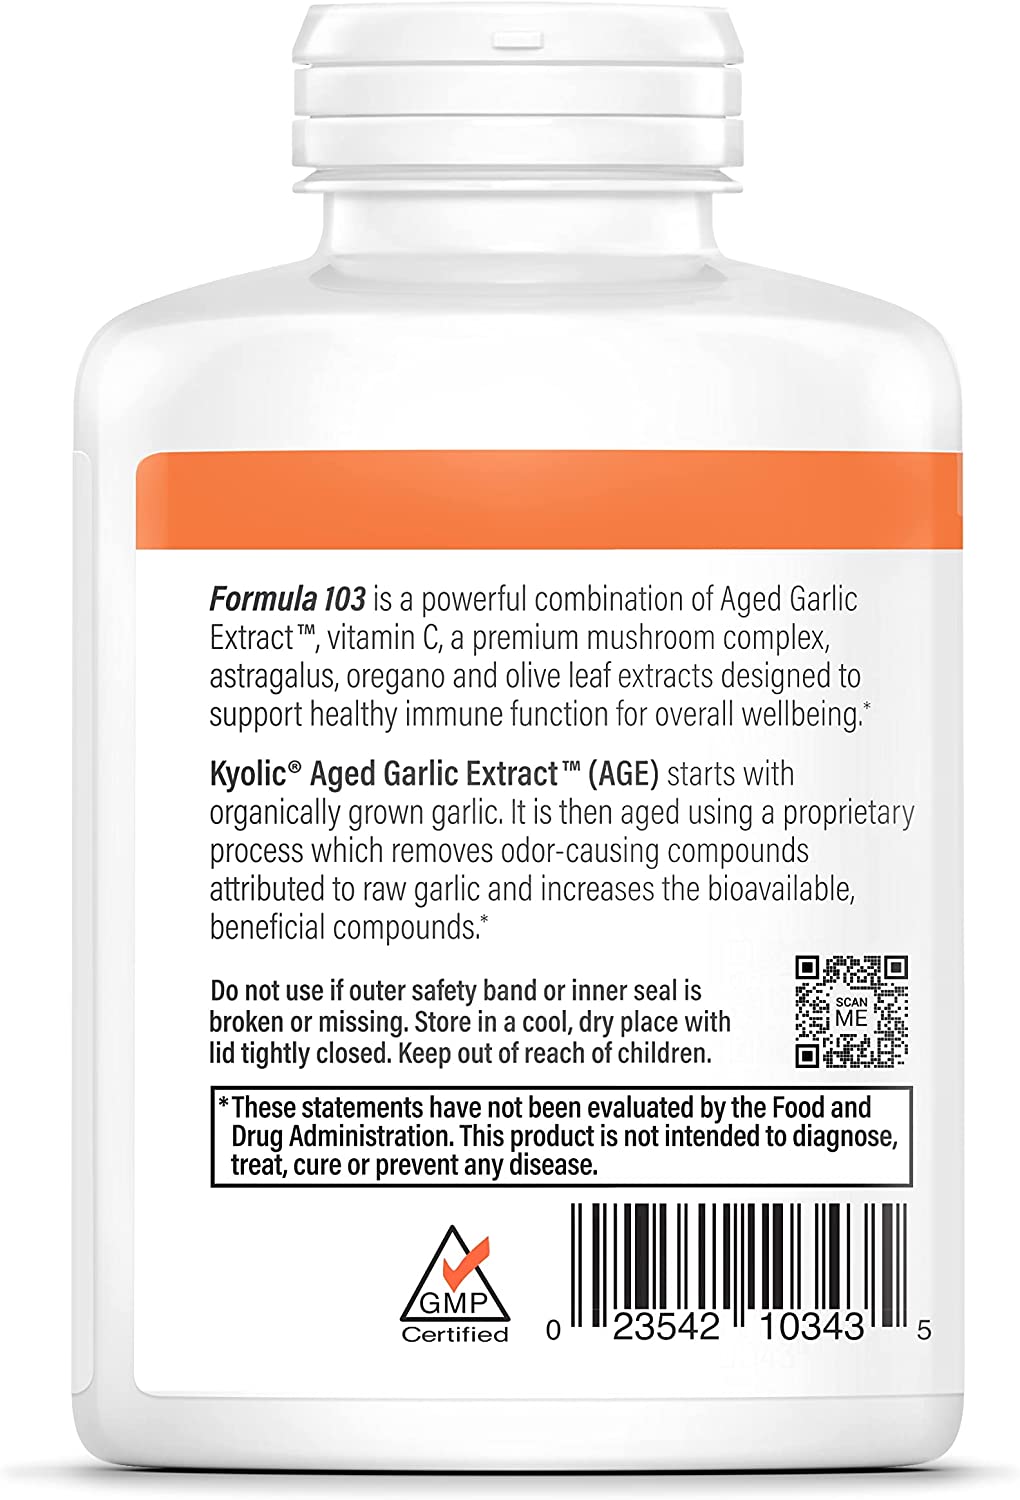 Kyolic Aged Garlic Extract lmmune Support - 300 Tablet-2